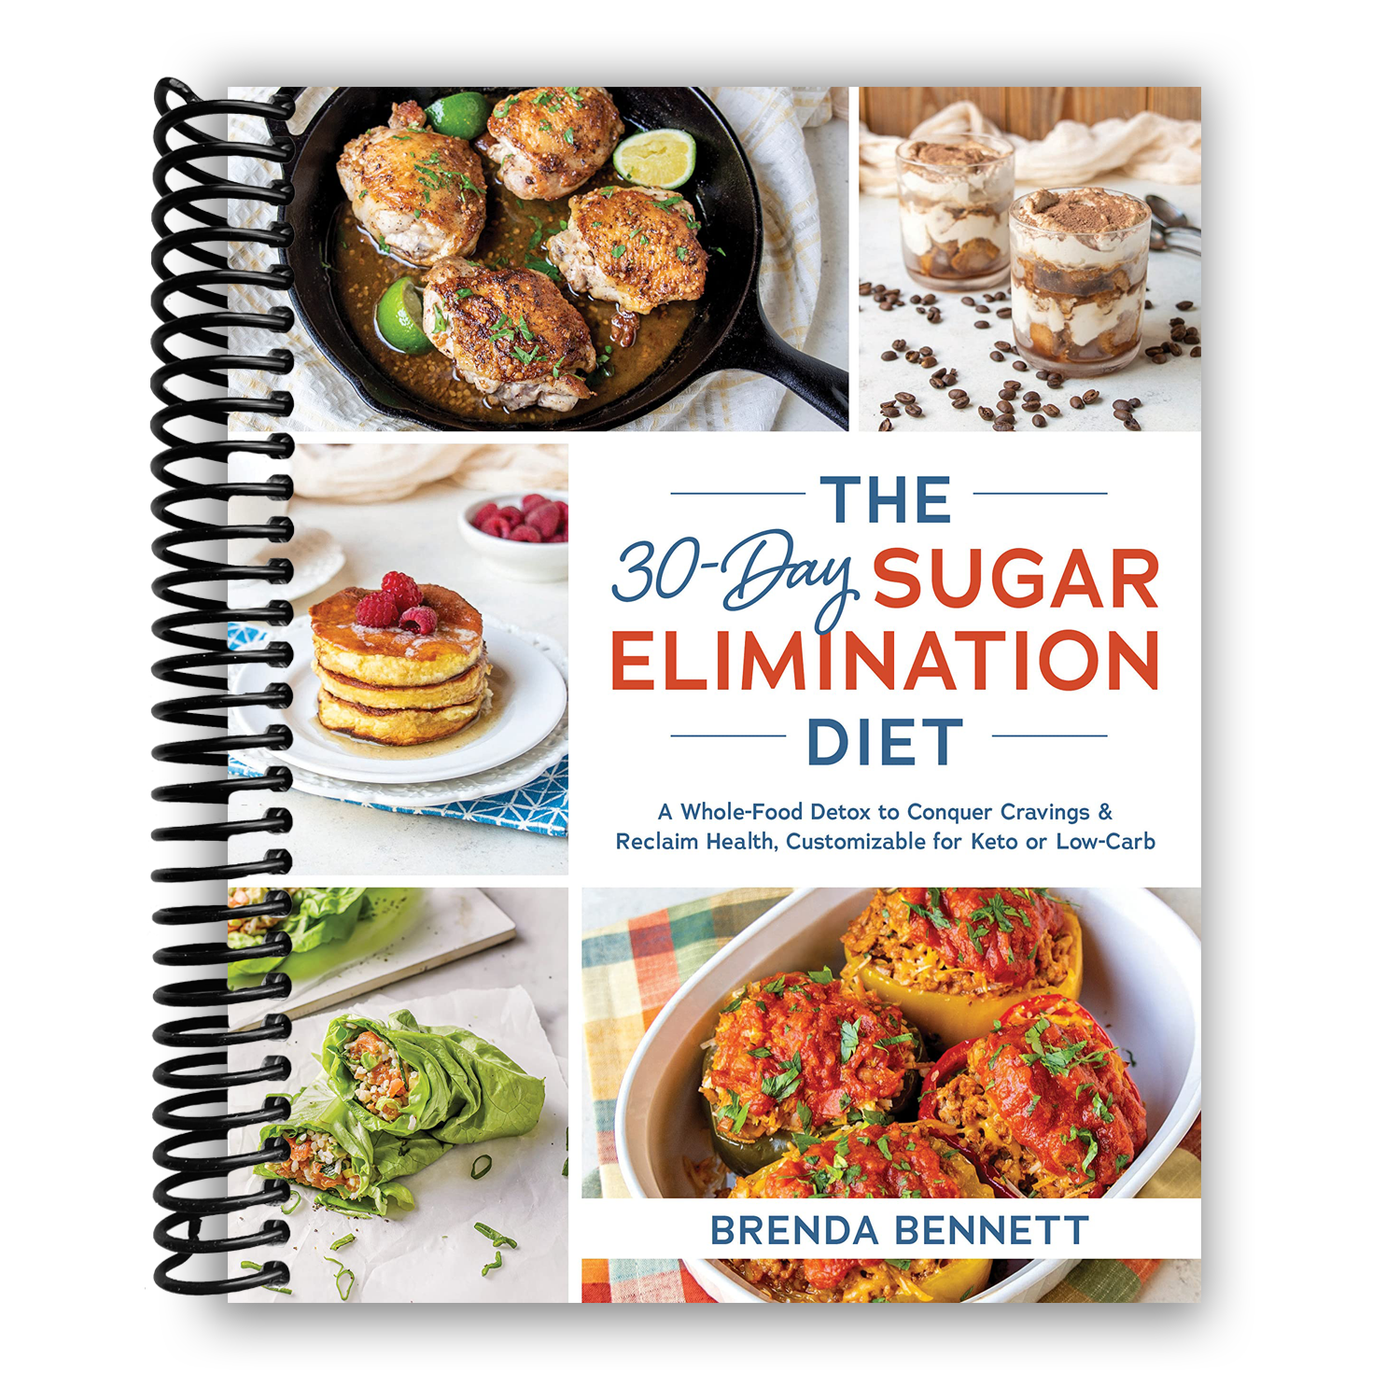 The 30-Day Sugar Elimination Diet: A Whole-Food Detox to Conquer Cravings & Reclaim Health, Customizable for Keto or Low-Carb (Spiral Bound)